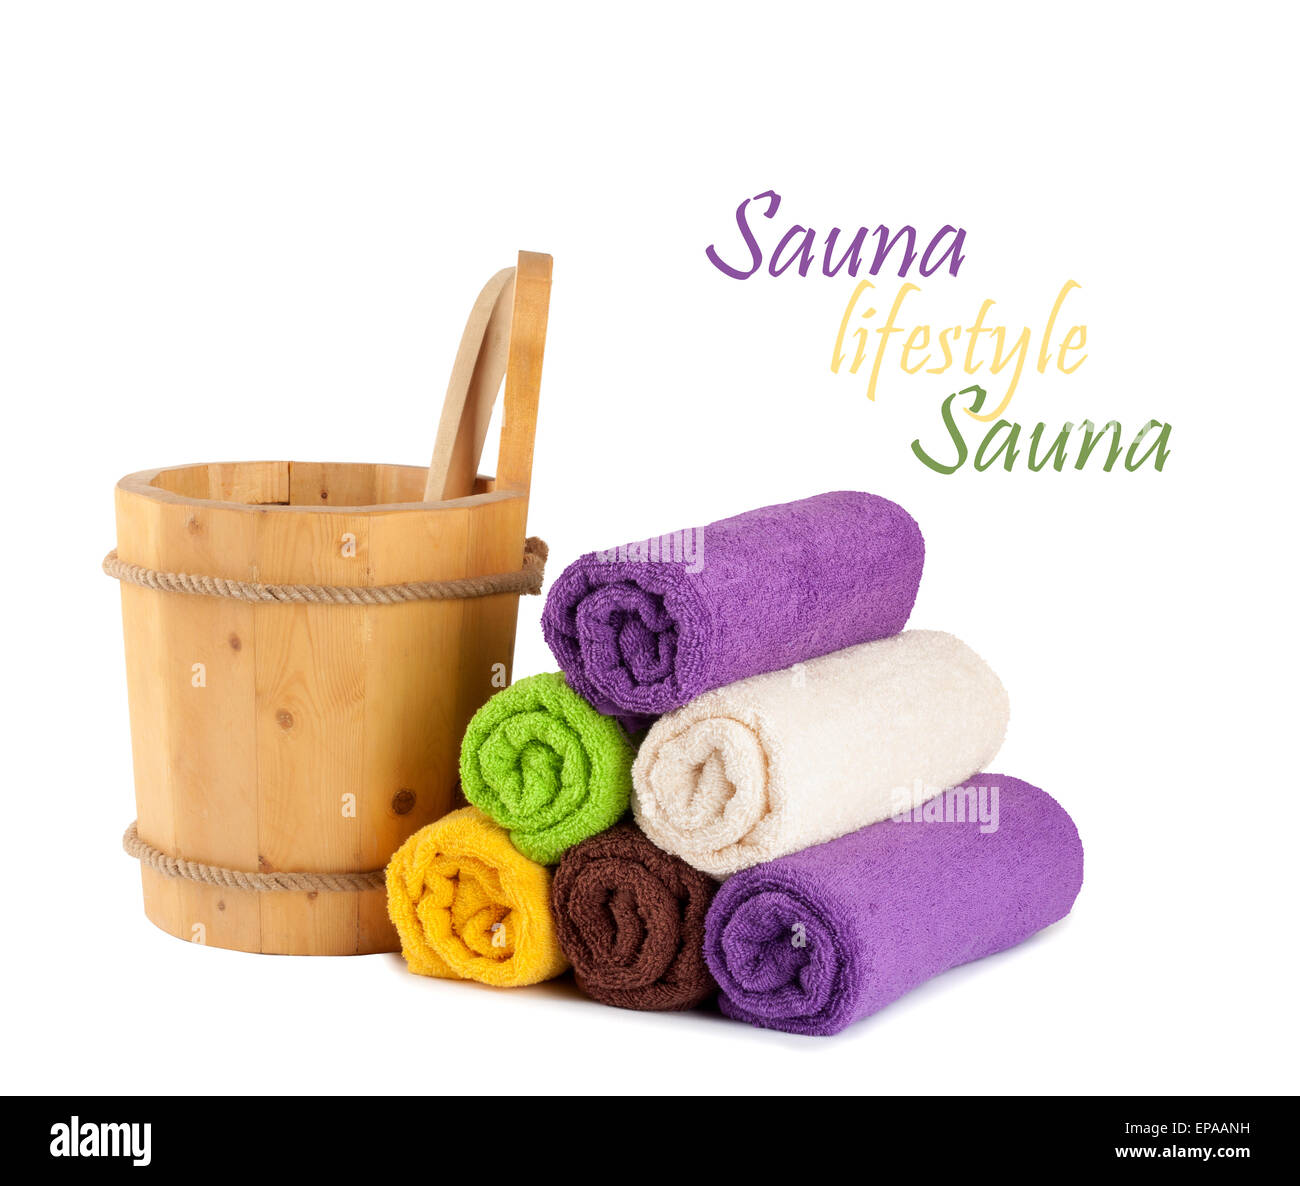 Wooden bucket with ladle for the sauna and stack of clean towels Stock Photo